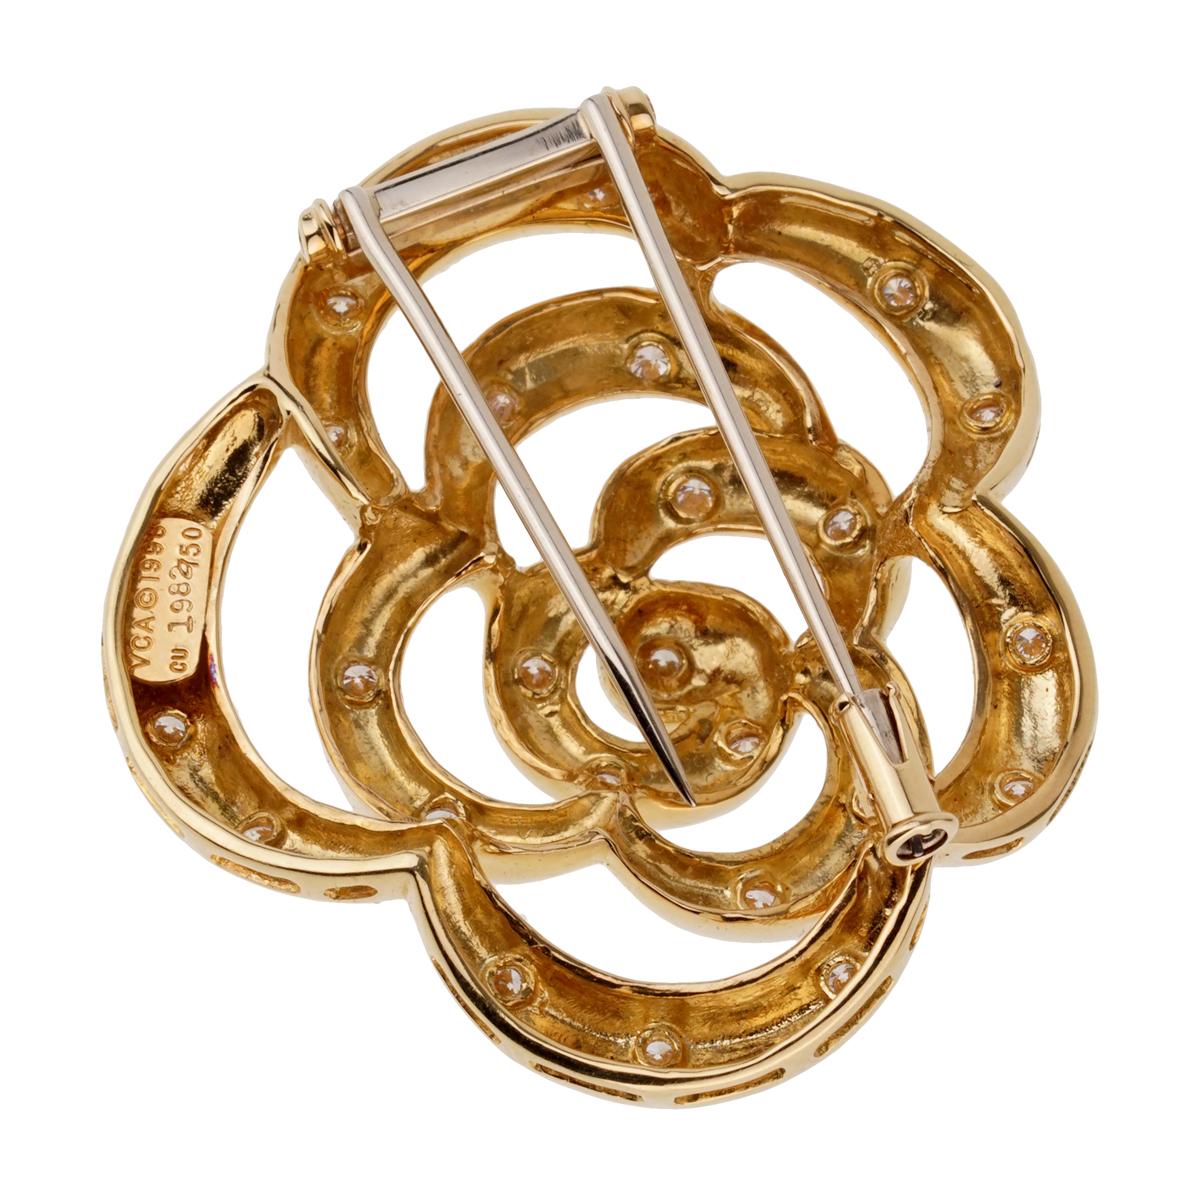 A fabulous Van Cleef & Arpels flower brooch circa 1990's adorned with round brilliant cut diamonds set in 18k yellow gold. The brooch measures 1.57